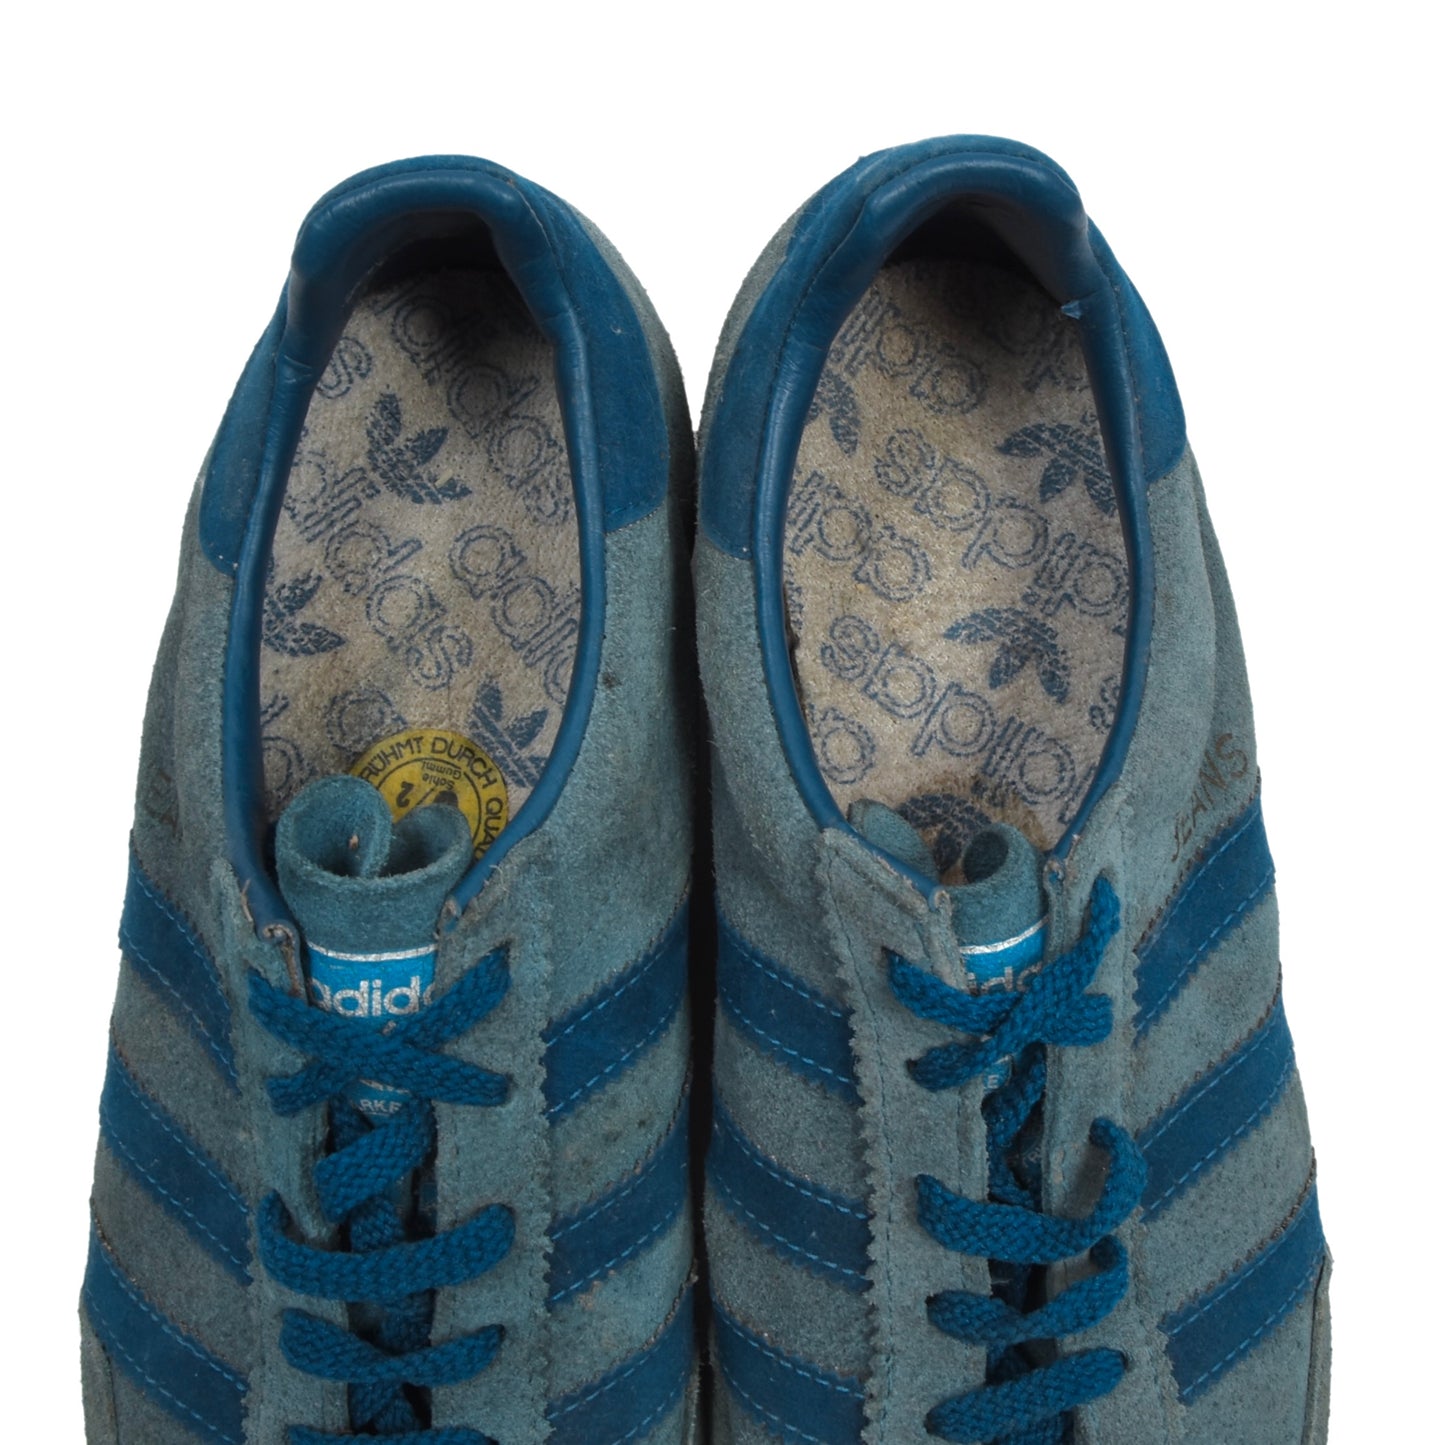 Vintage Adidas Jeans Sneakers Size 5 1/2 - Blue